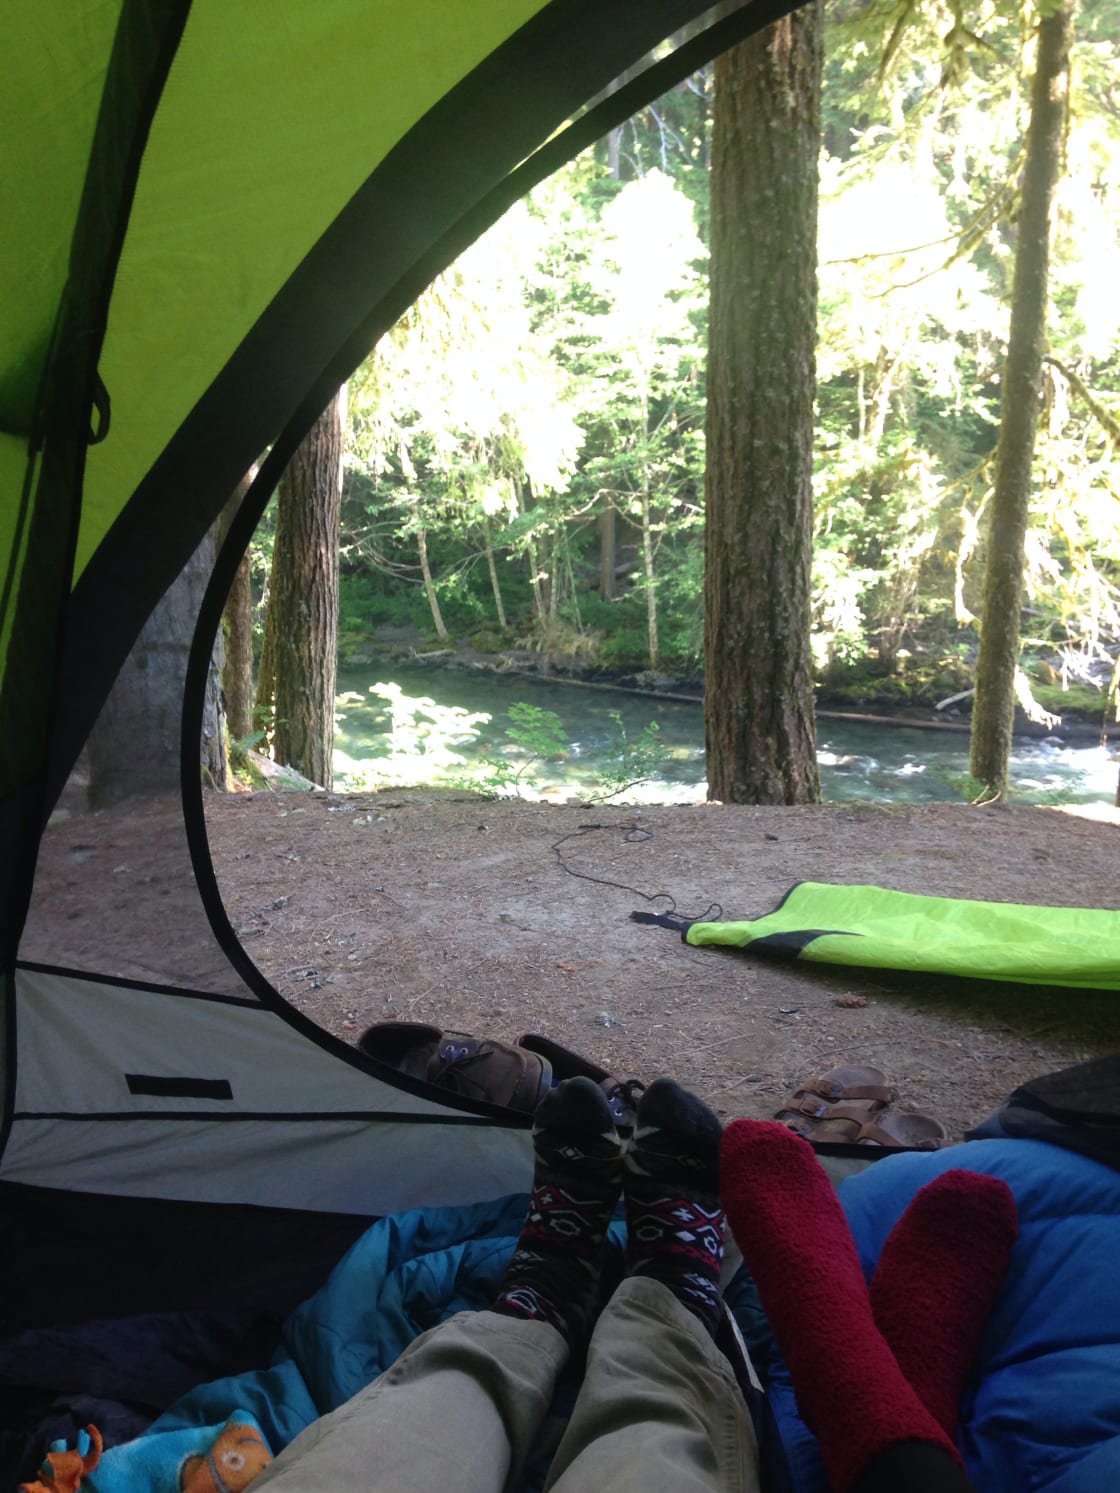 Ohanapecosh campground has amazing campsites! Surrounded by giant trees, with campsites right along a beautiful creek. Sounds of the creek blocked out all noise. Nice short hike nearby 